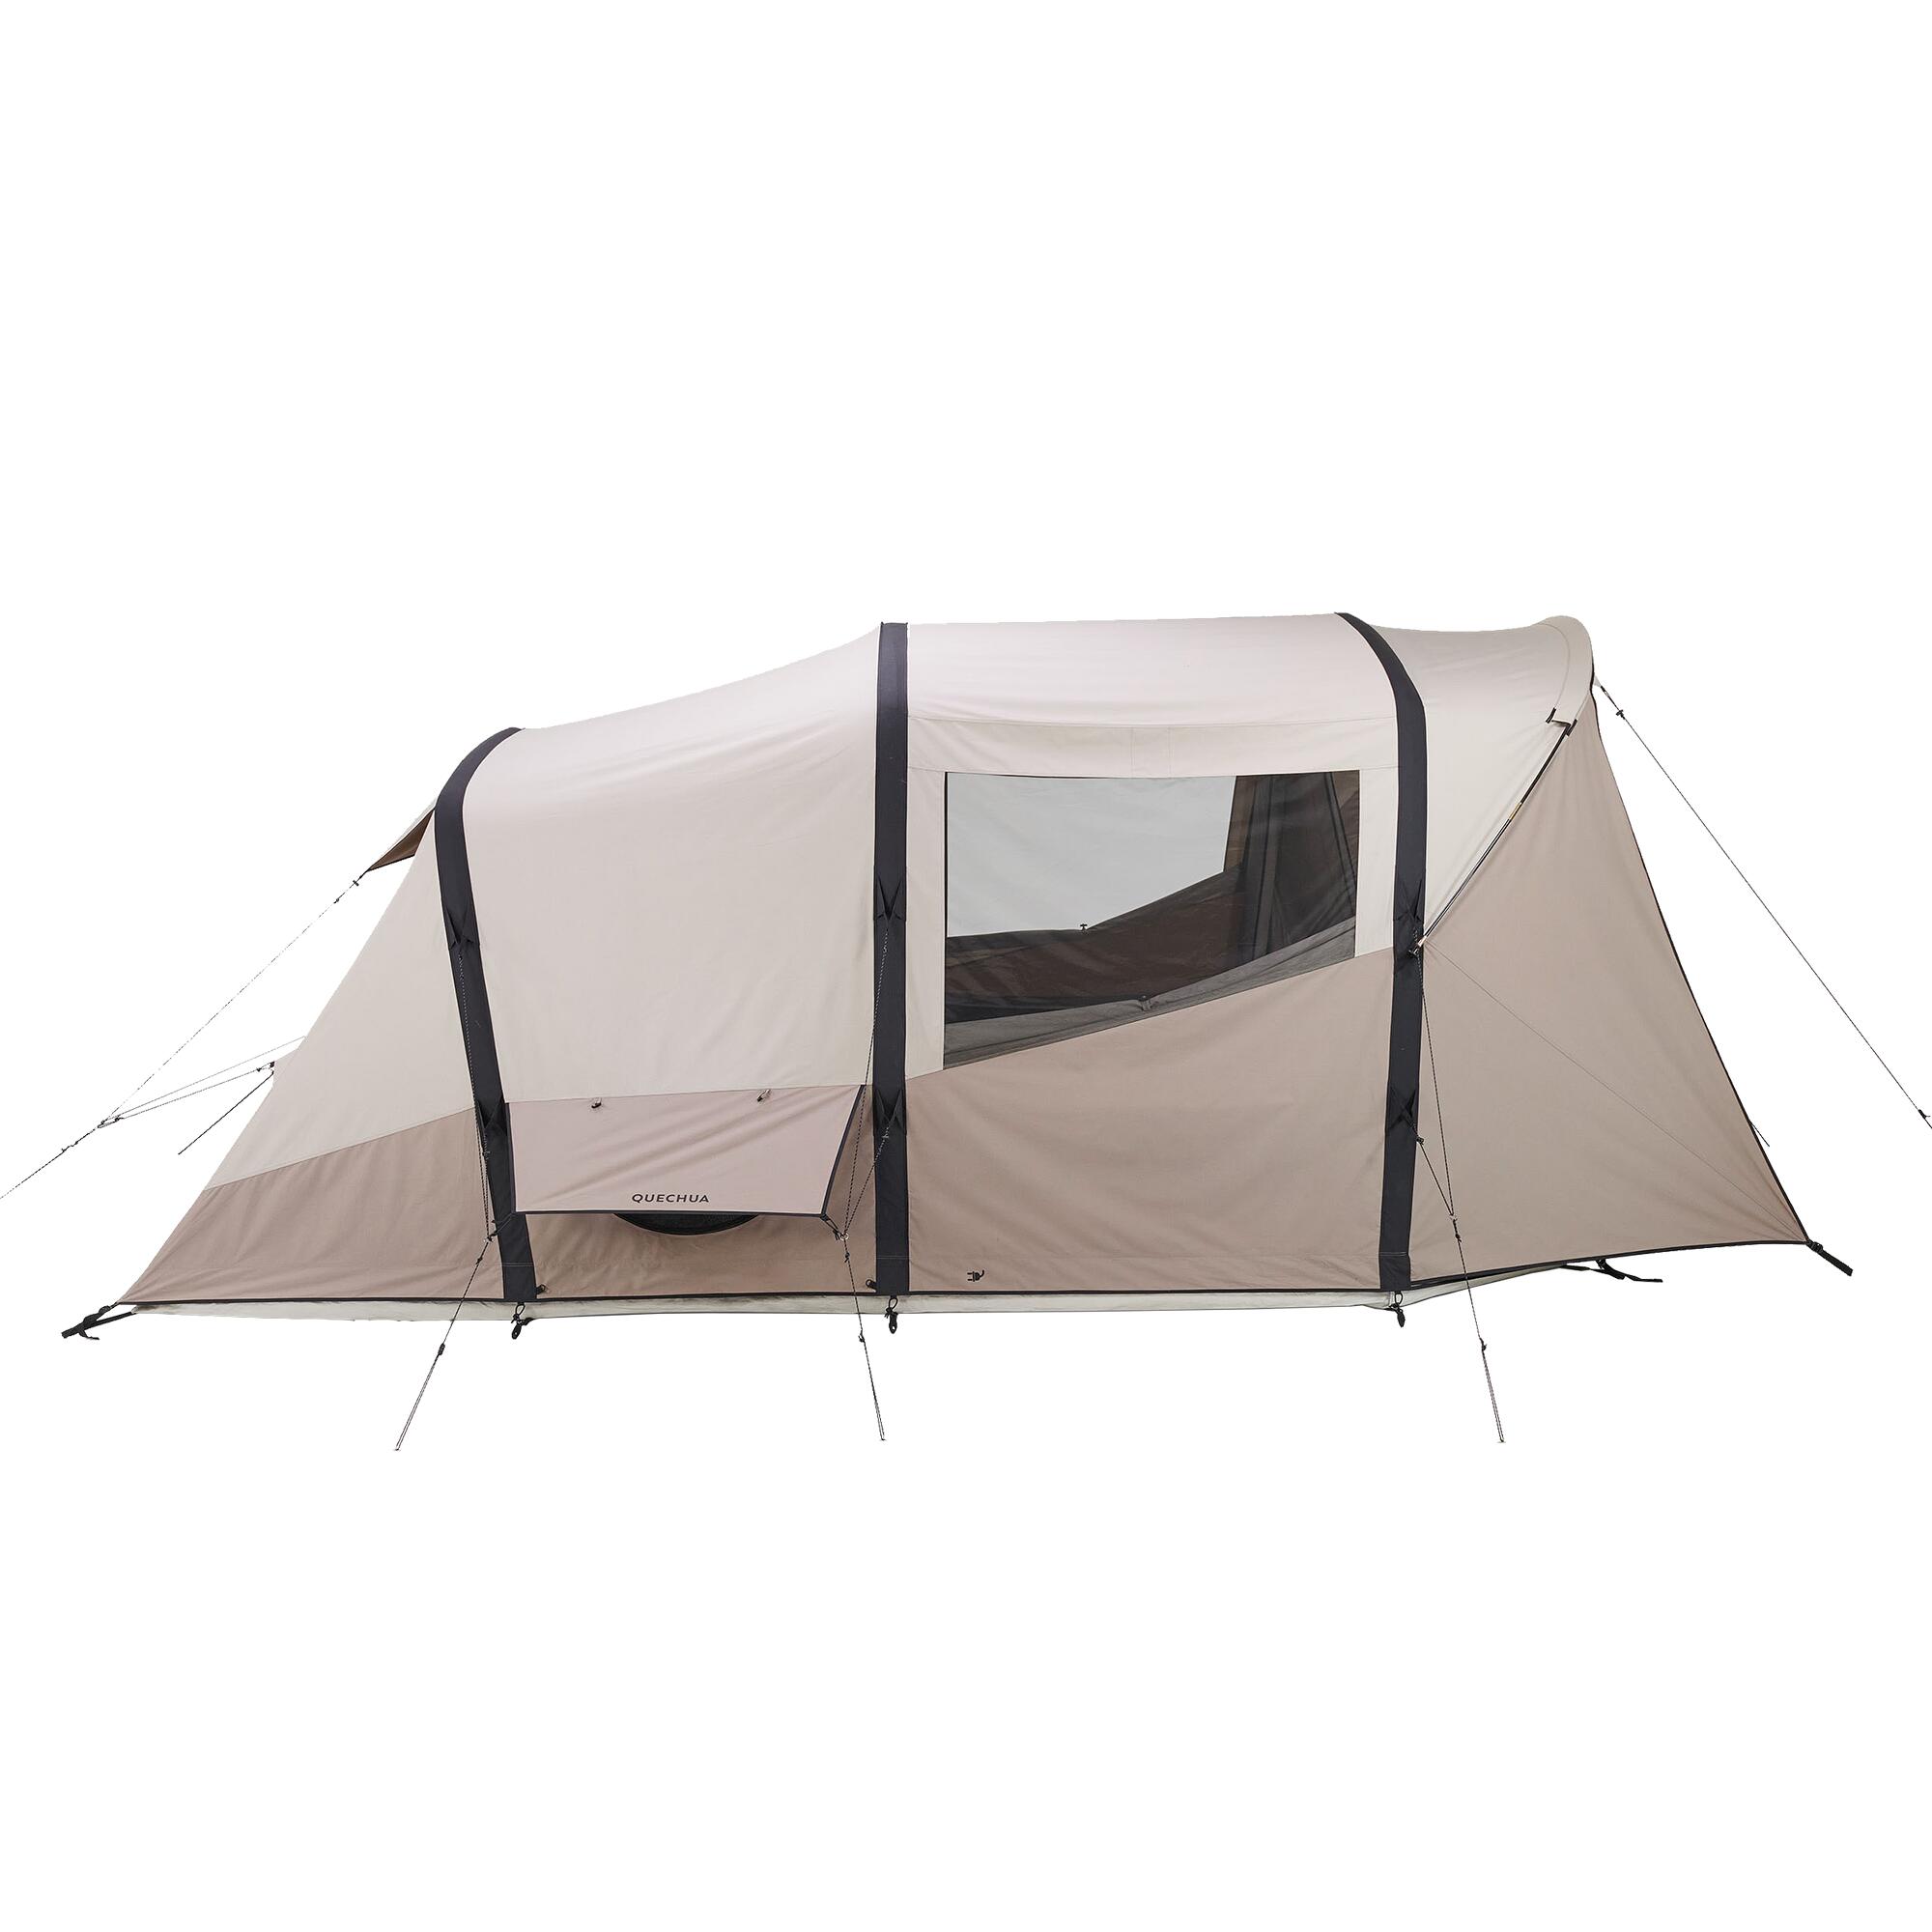 Inflatable camping tent - AirSeconds 4.2 Polycotton - 4 Person - 2 Bedrooms 6/28